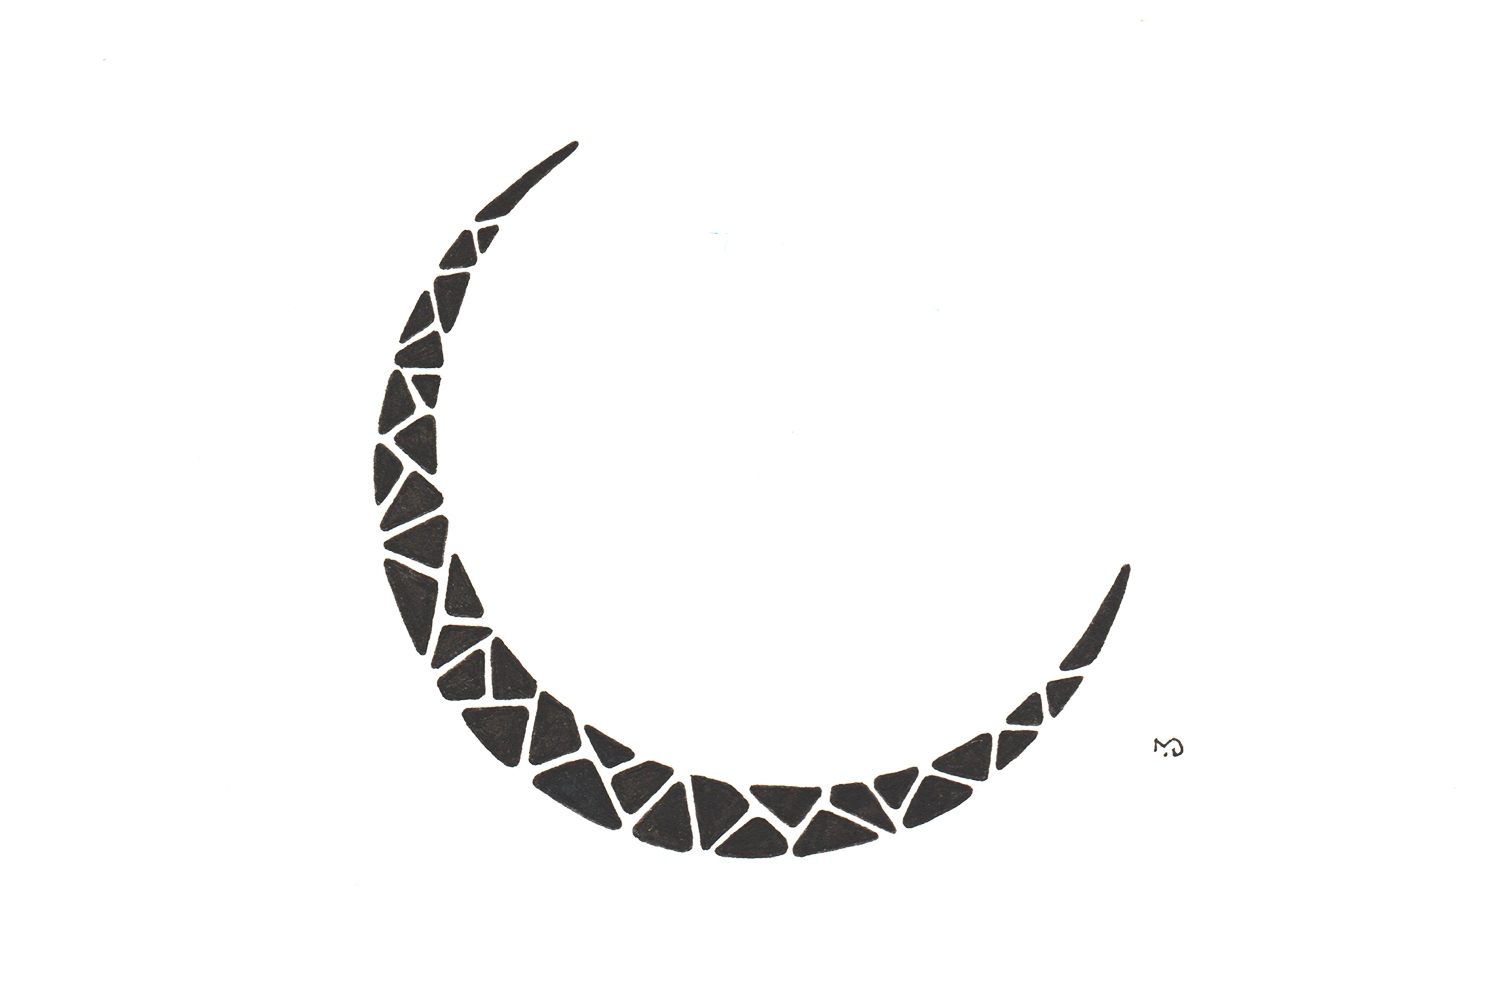 Elated-Complements-moon-pen-drawing-pattern-zentangle-07